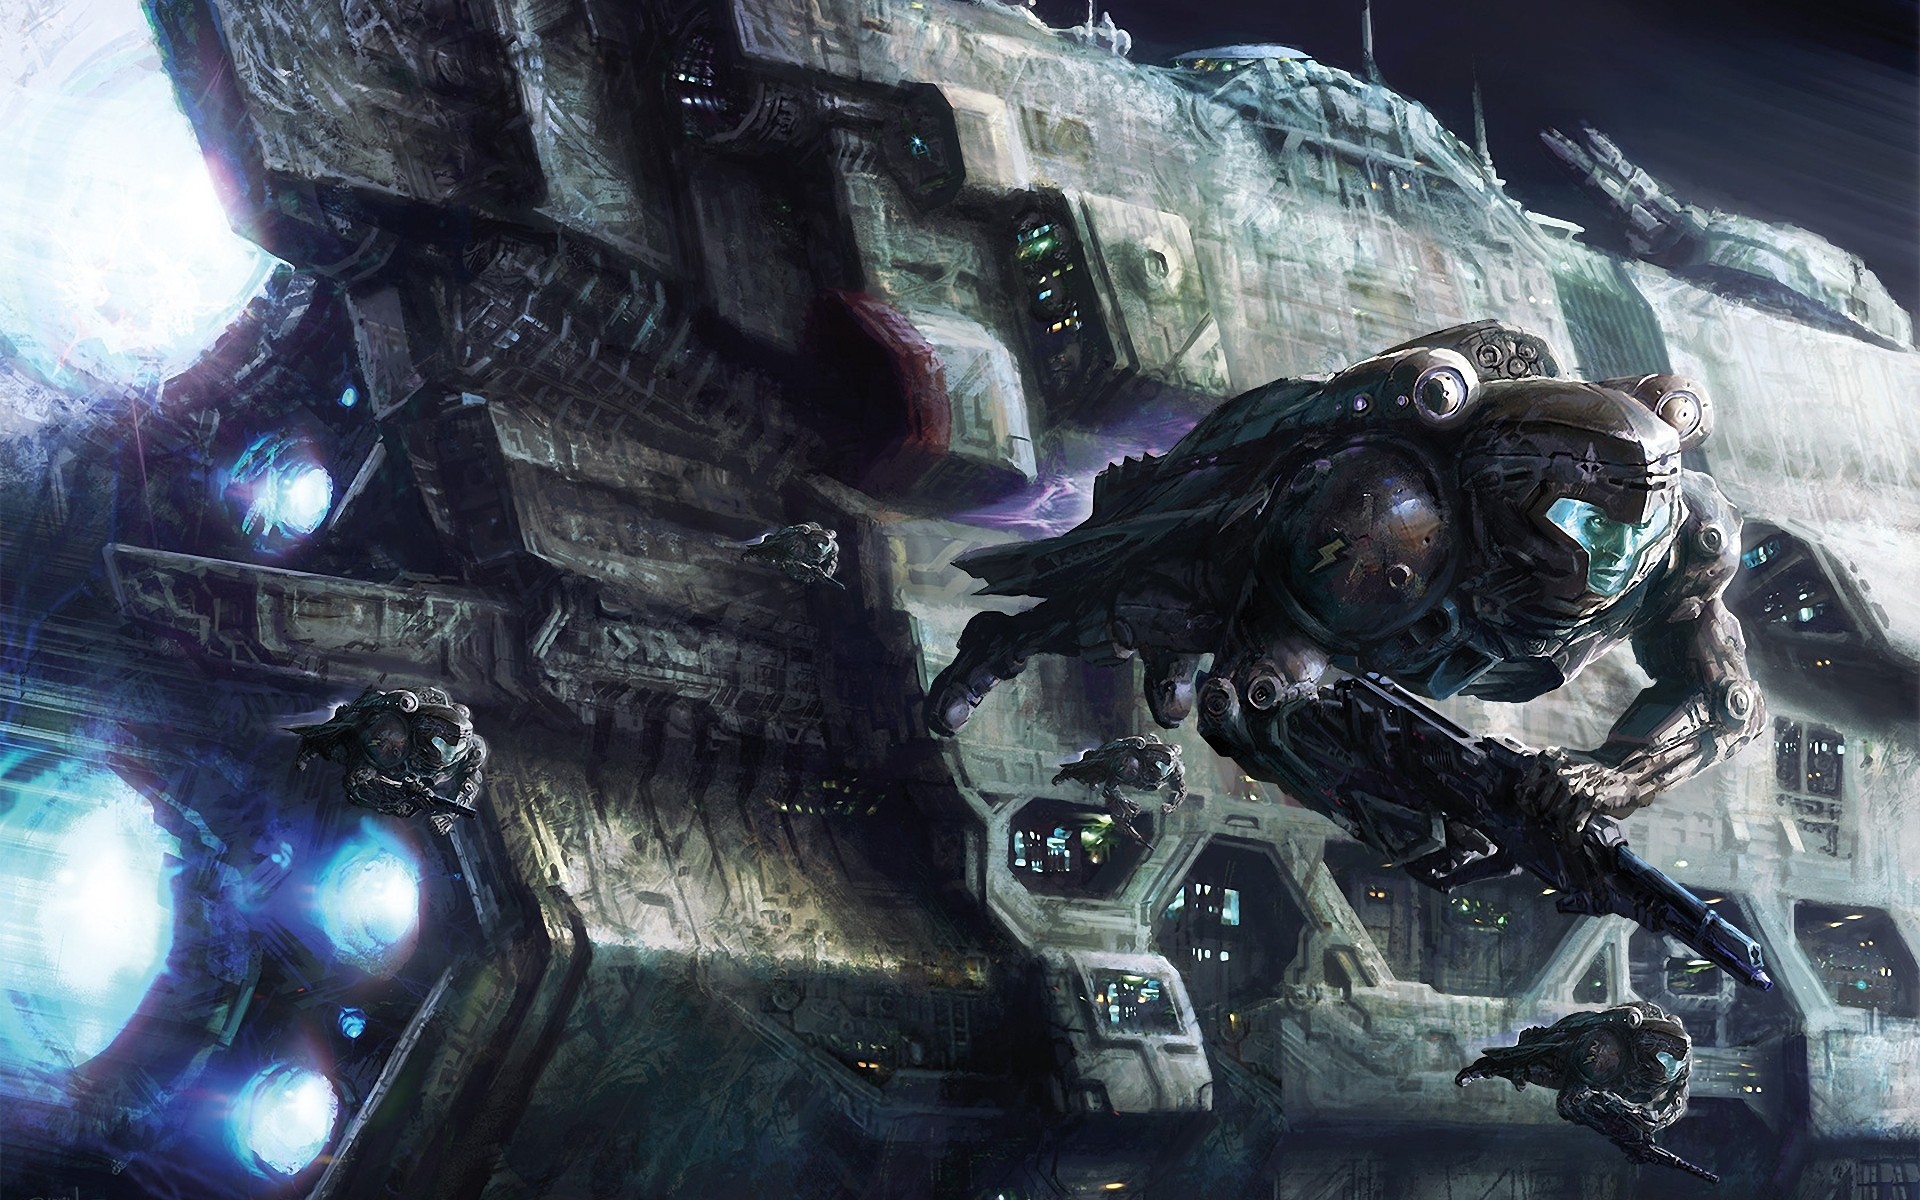 outer, Space, Guns, Astronauts, Spaceships, Science, Fiction, Artwork, Vehicles Wallpaper